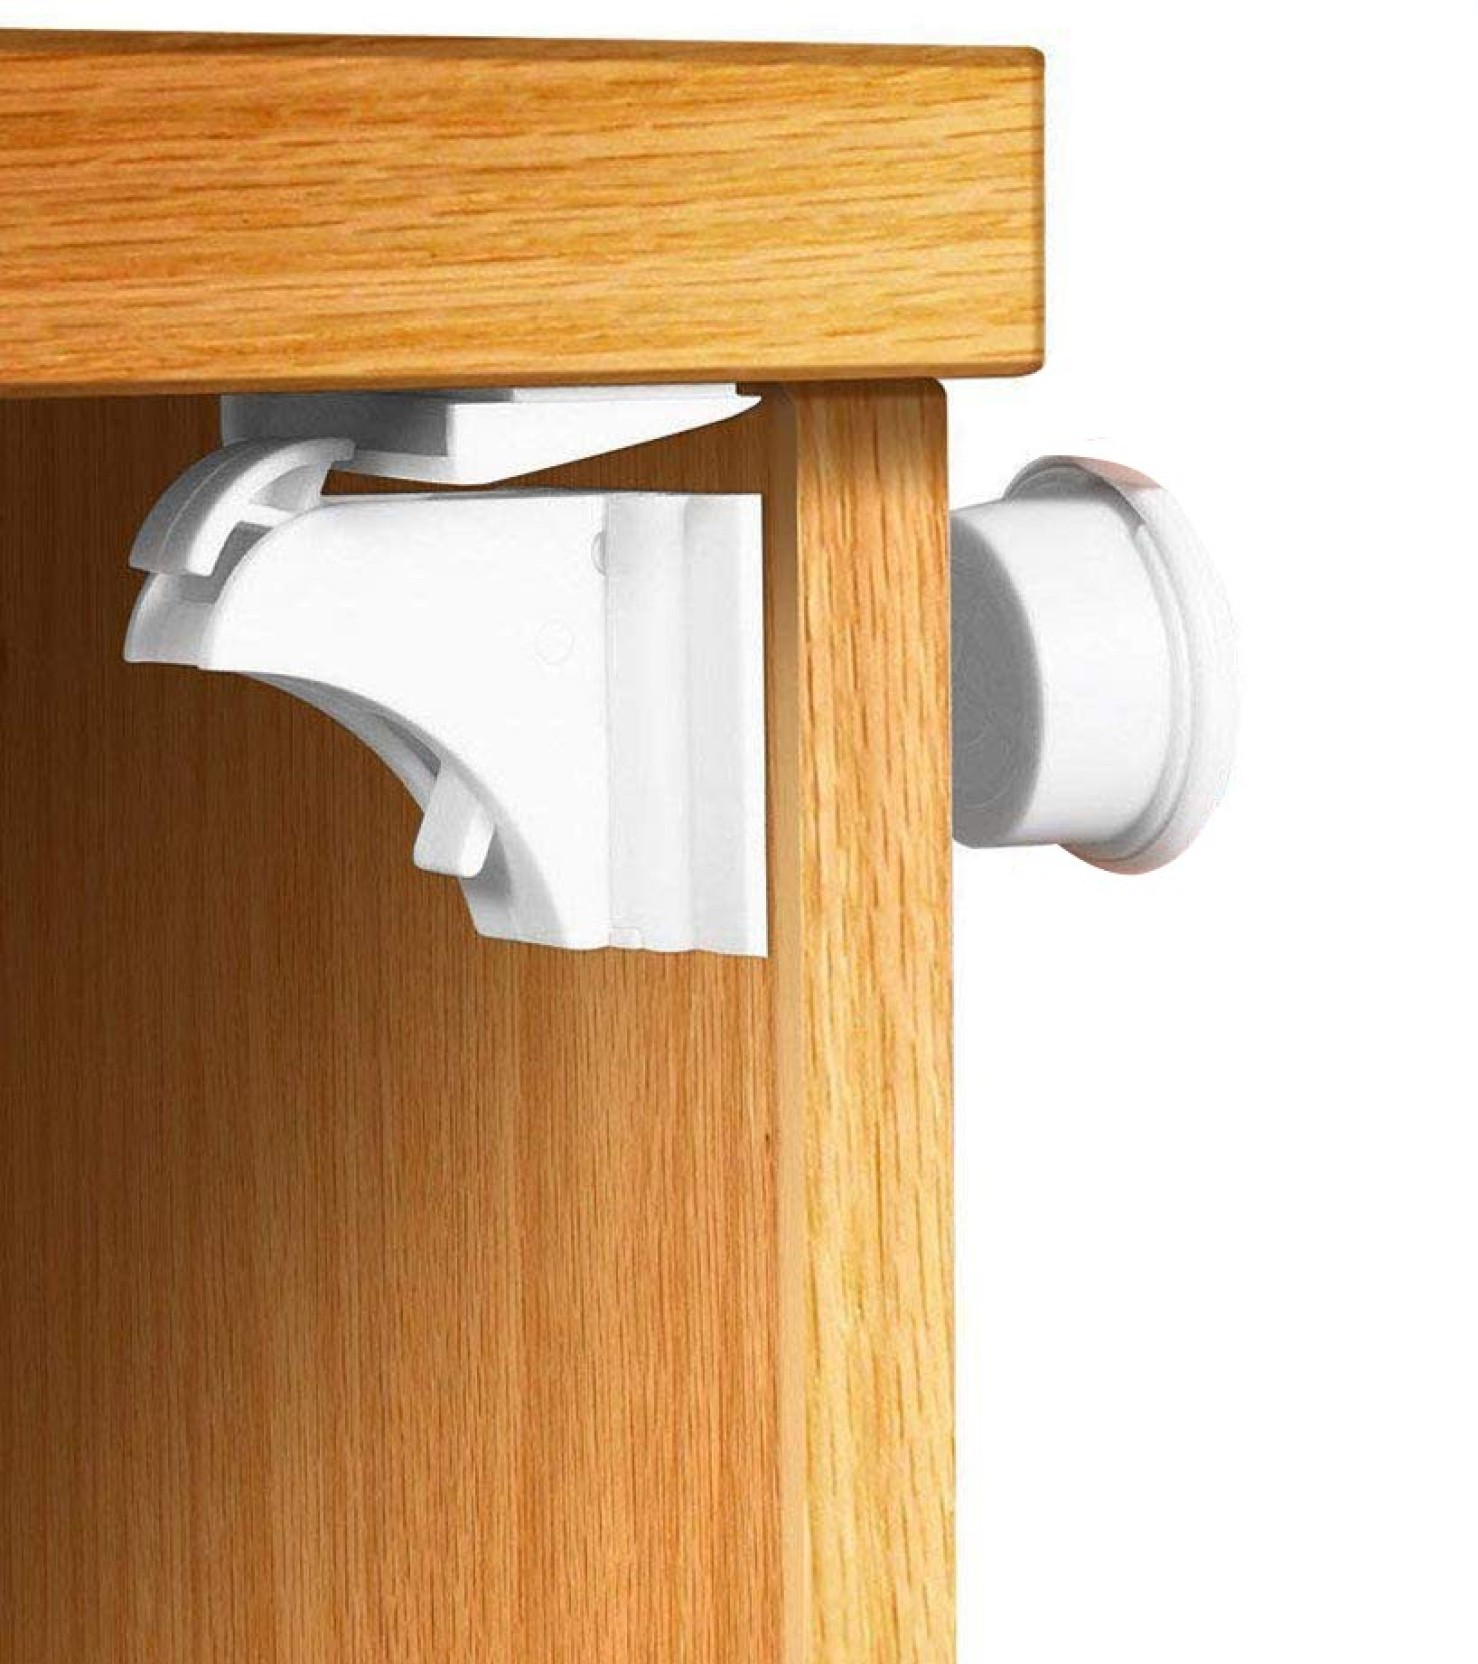 House Of Quirk Baby Safety Magnetic Cabinet Locks Adhesive No